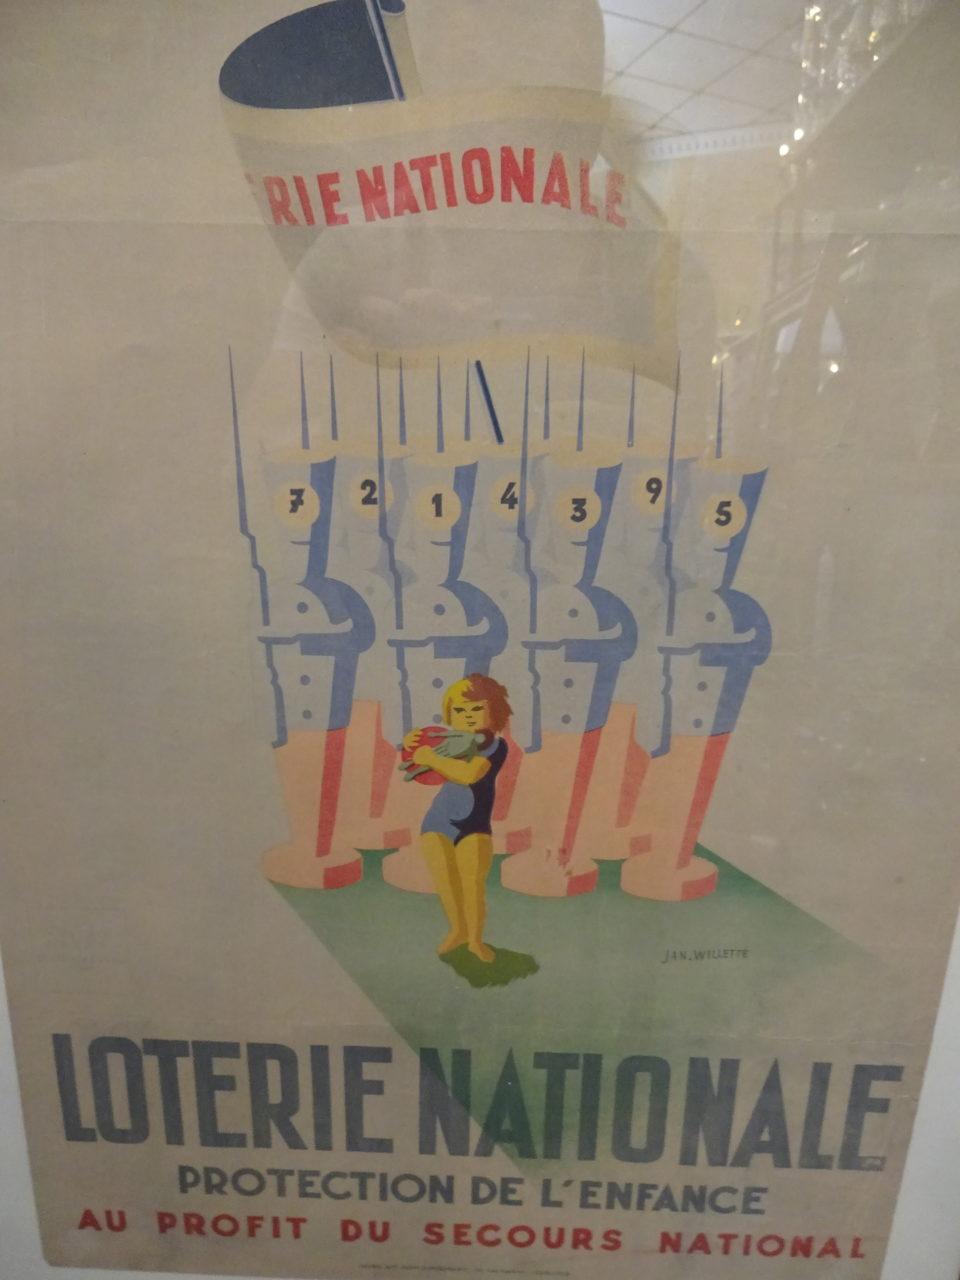 Fabulous and stylish original French National lottery advertising poster, dating from 1938-1944. A true vintage poster art collectible and great room interior.

This one is well framed in a lovely black stained wooden frame.